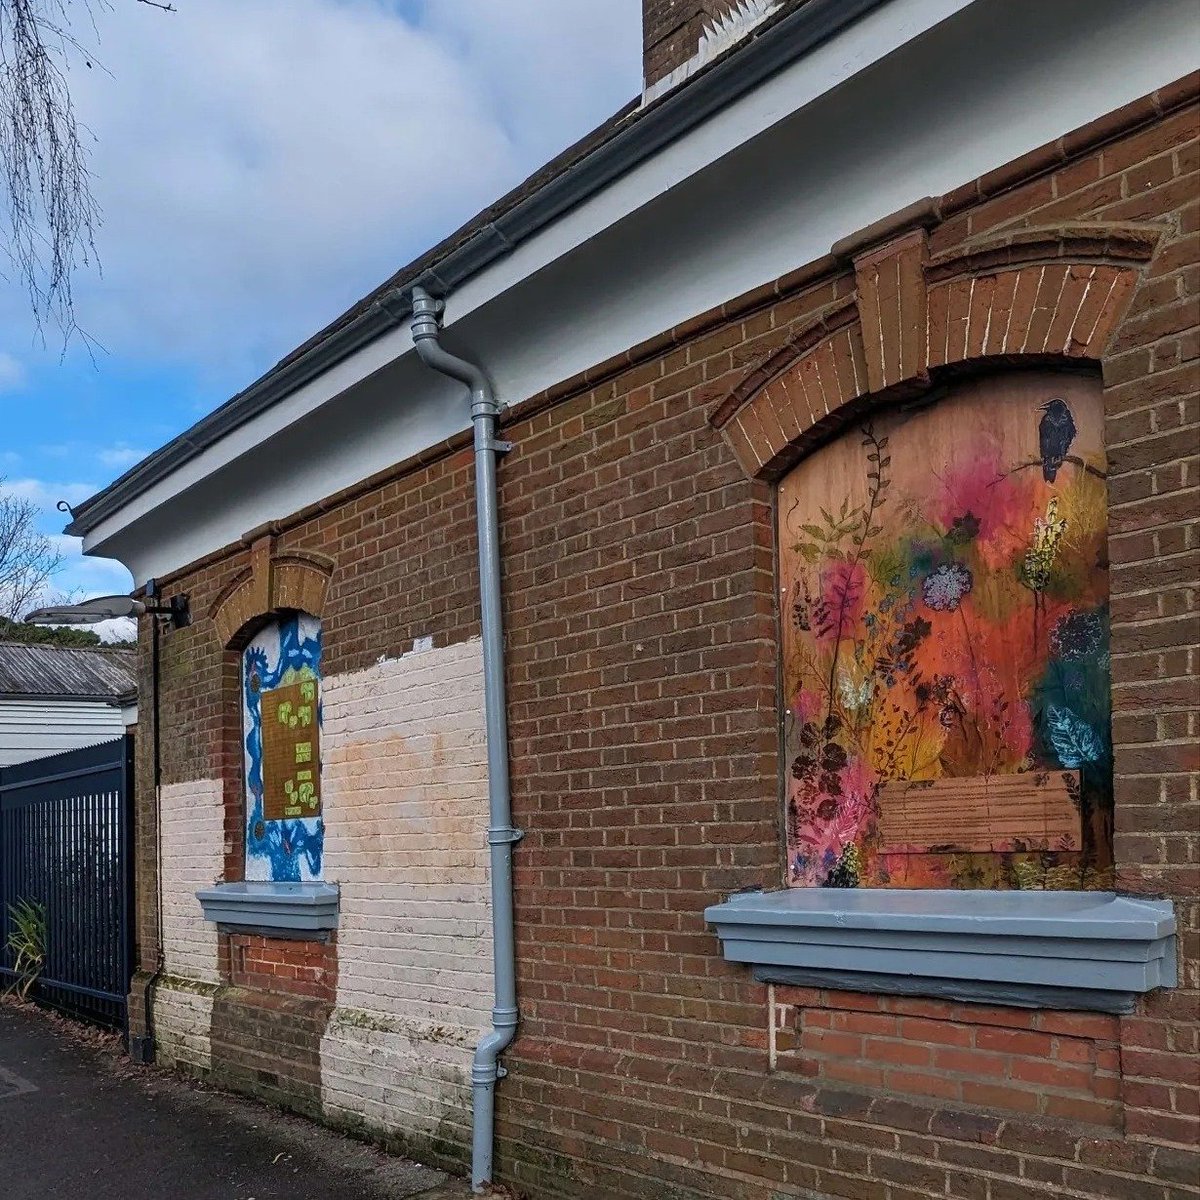 Murals inspired by Swaythling rail station produced by the Drawing on the Outside group in autumn 2023.
Funded by Arts Council England, Abri Housing Association, Three Rivers Rail Partnership, The Tree Council and Southampton Voluntary Services.
#CommunityRail @SW_Help